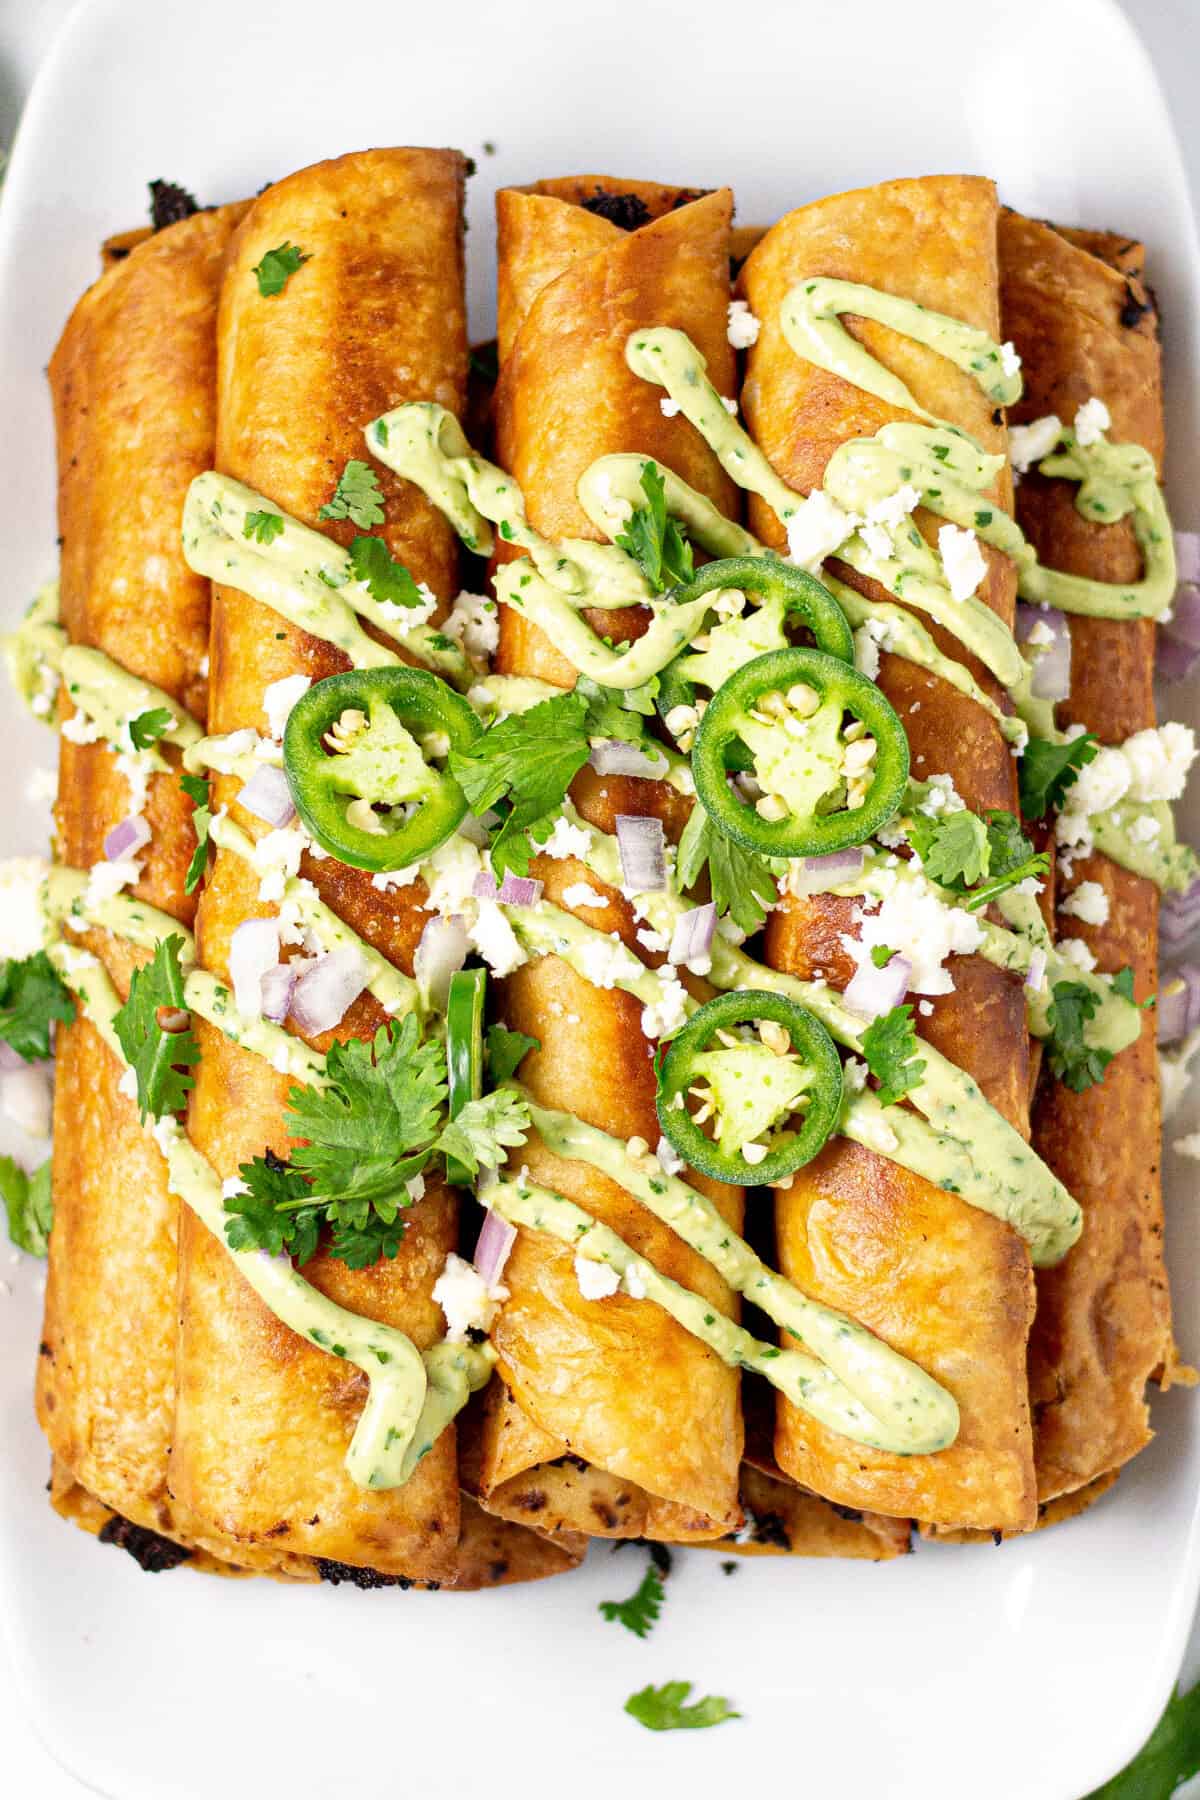 Overhead shot of a platter filled with flautas garnished with cilantro